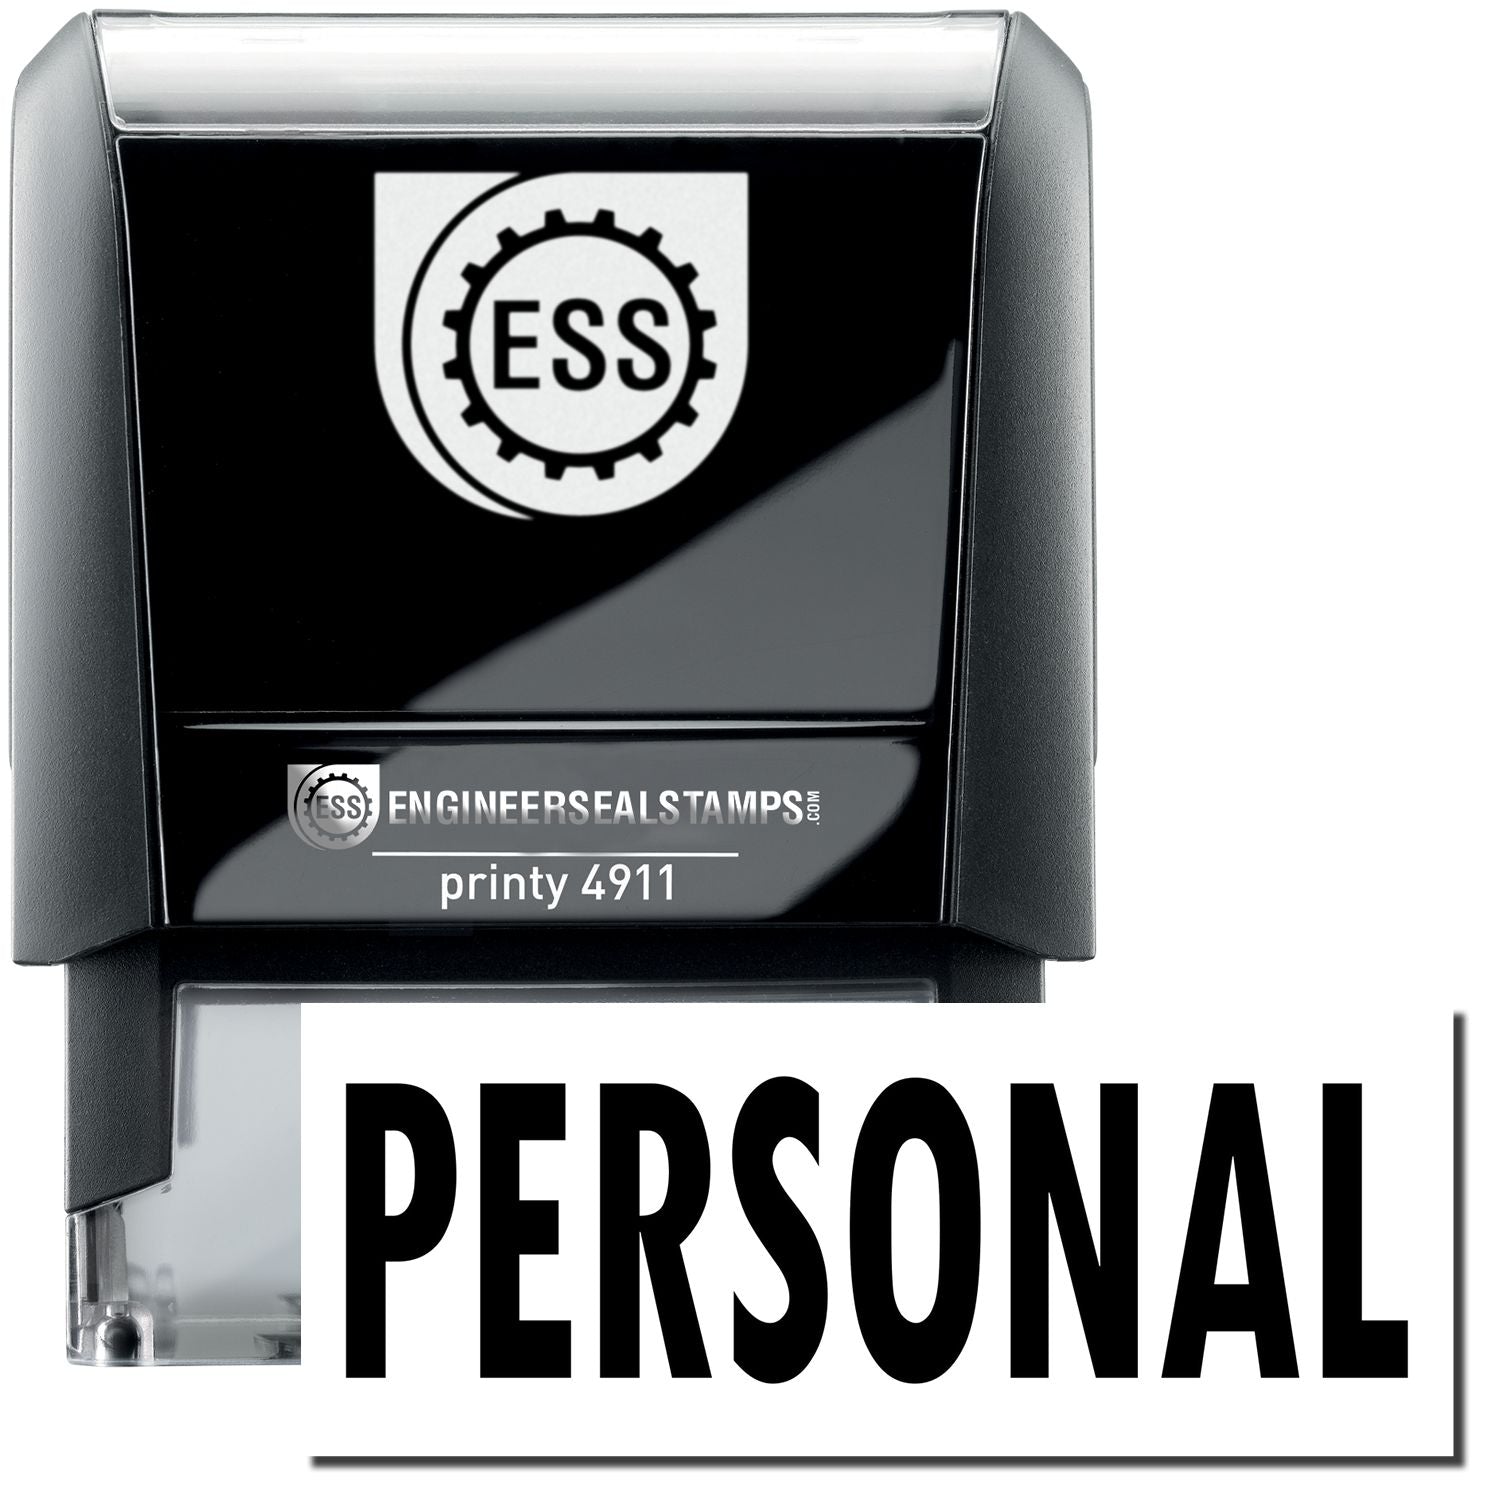 A self-inking stamp with a stamped image showing how the text "PERSONAL" is displayed after stamping.